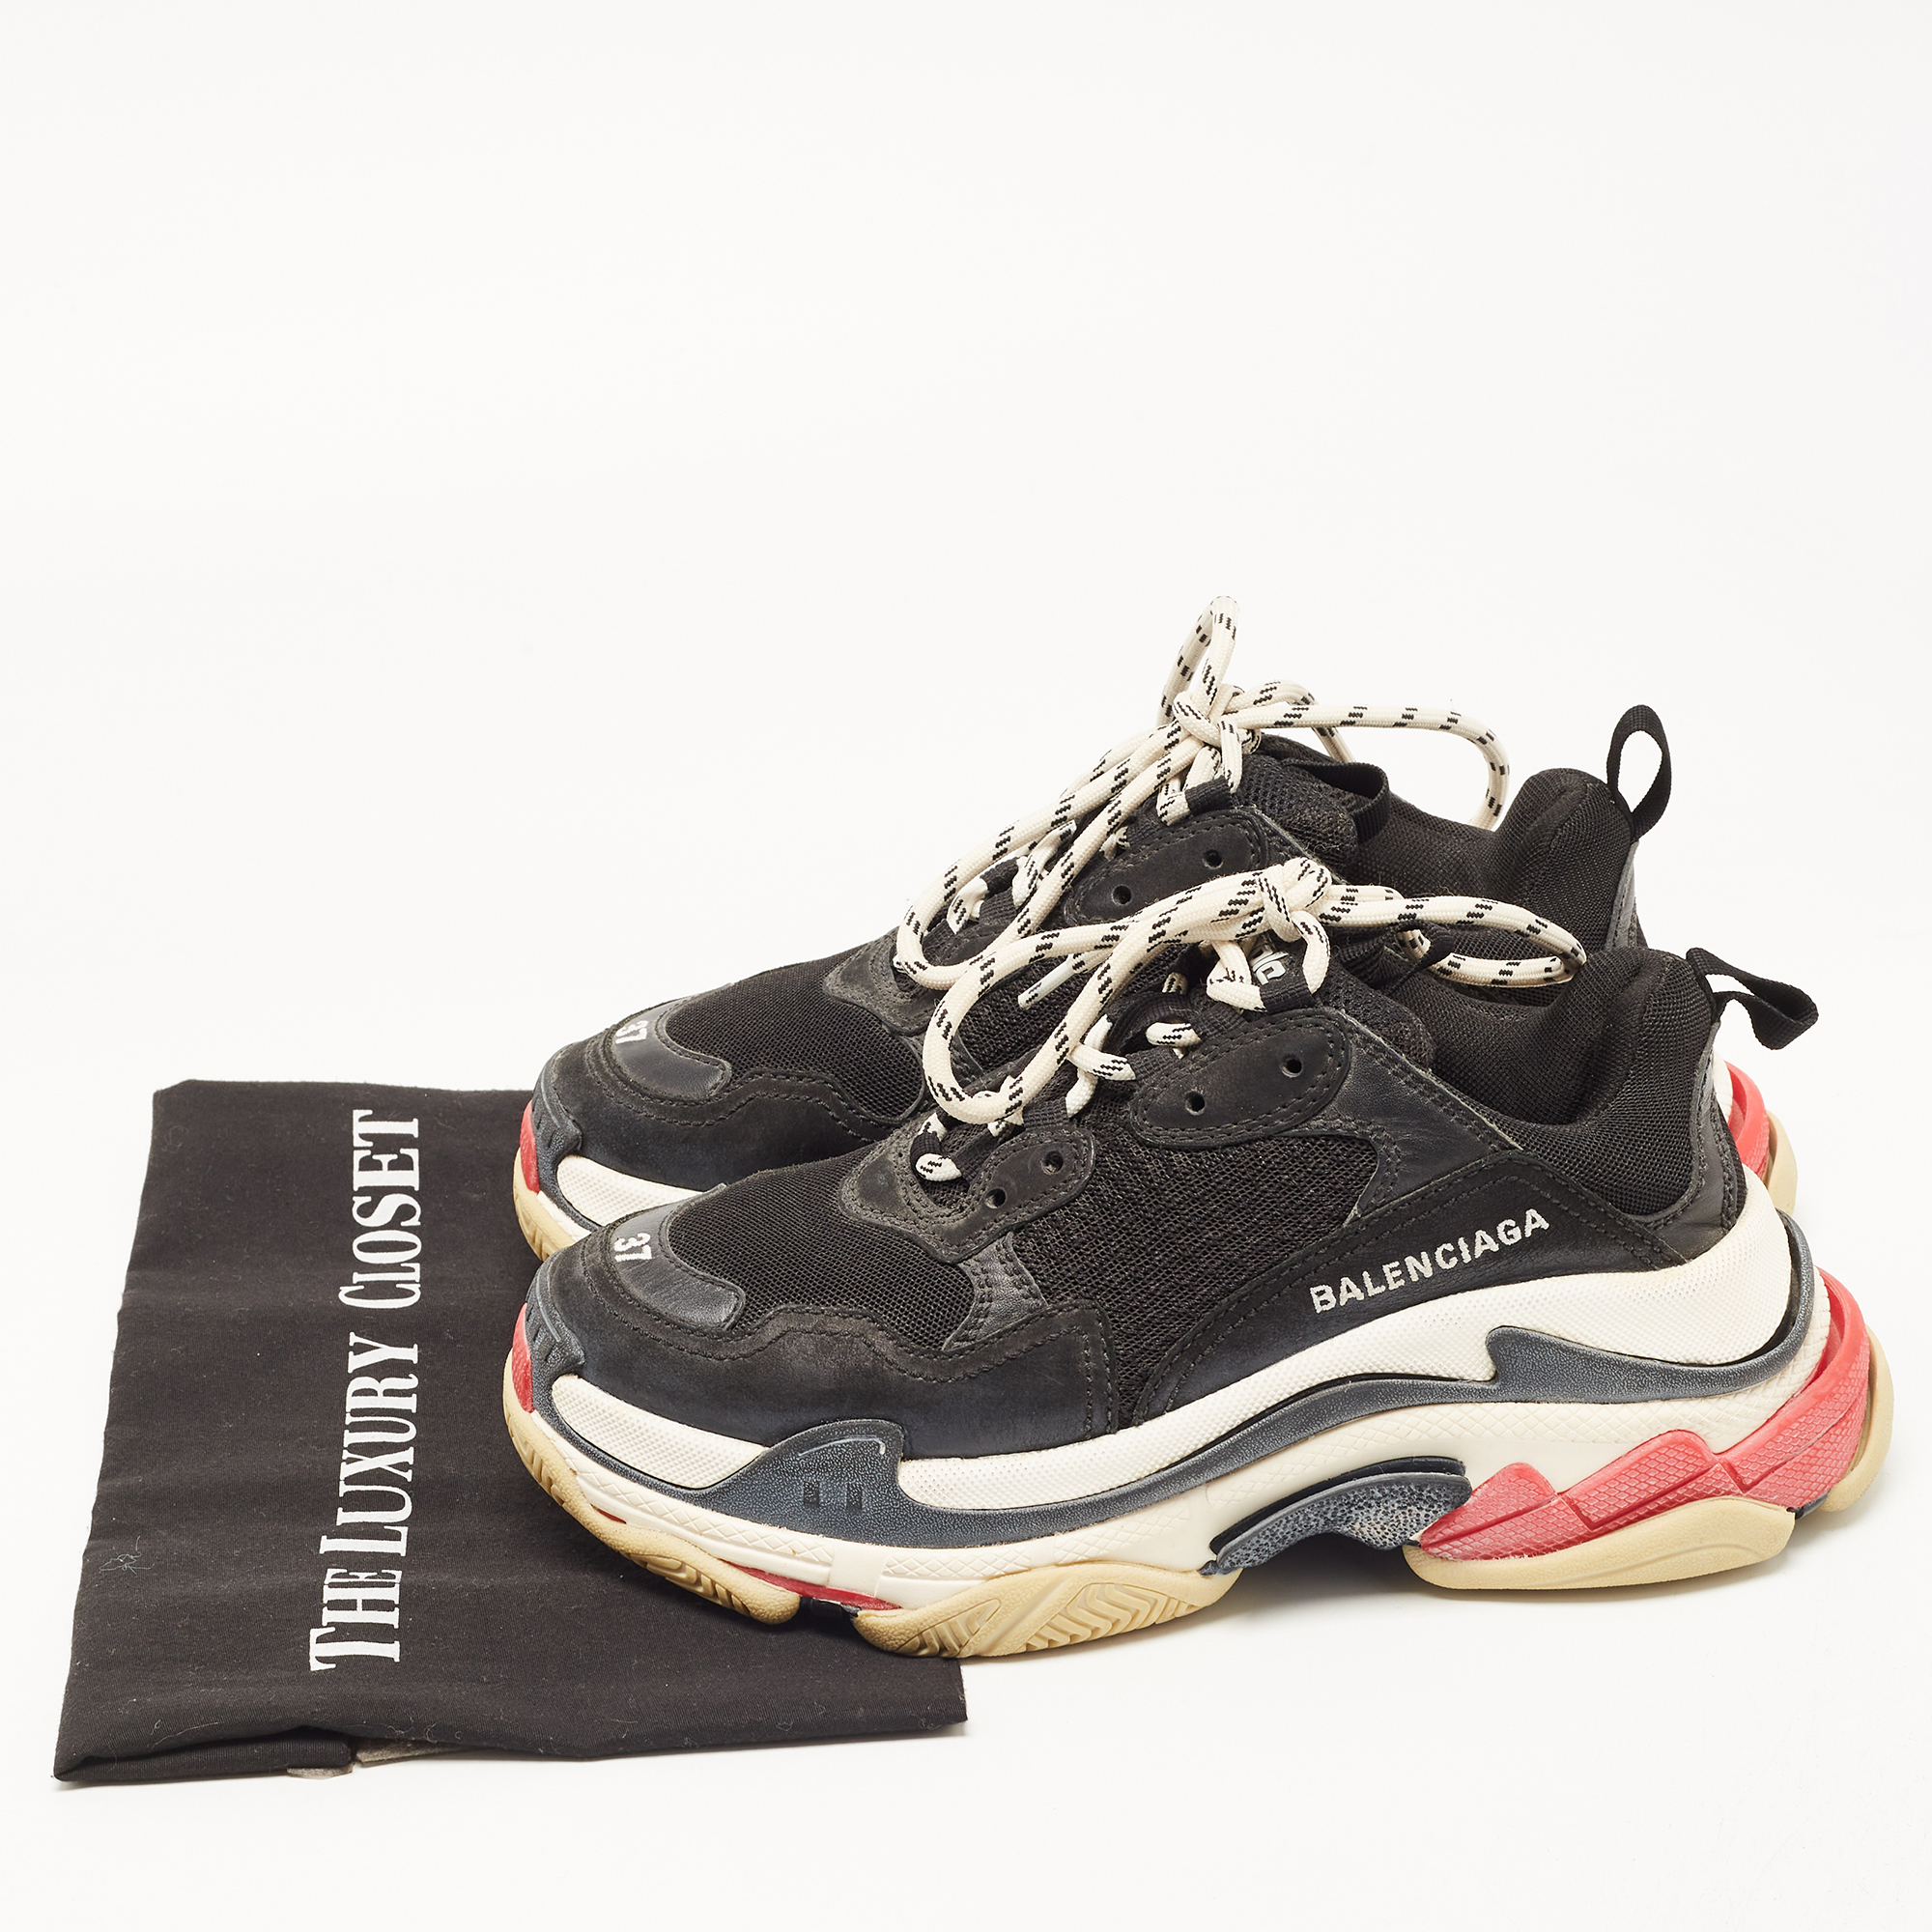 Balenciaga Black Leather And Mesh Triple S Sneakers Size 37